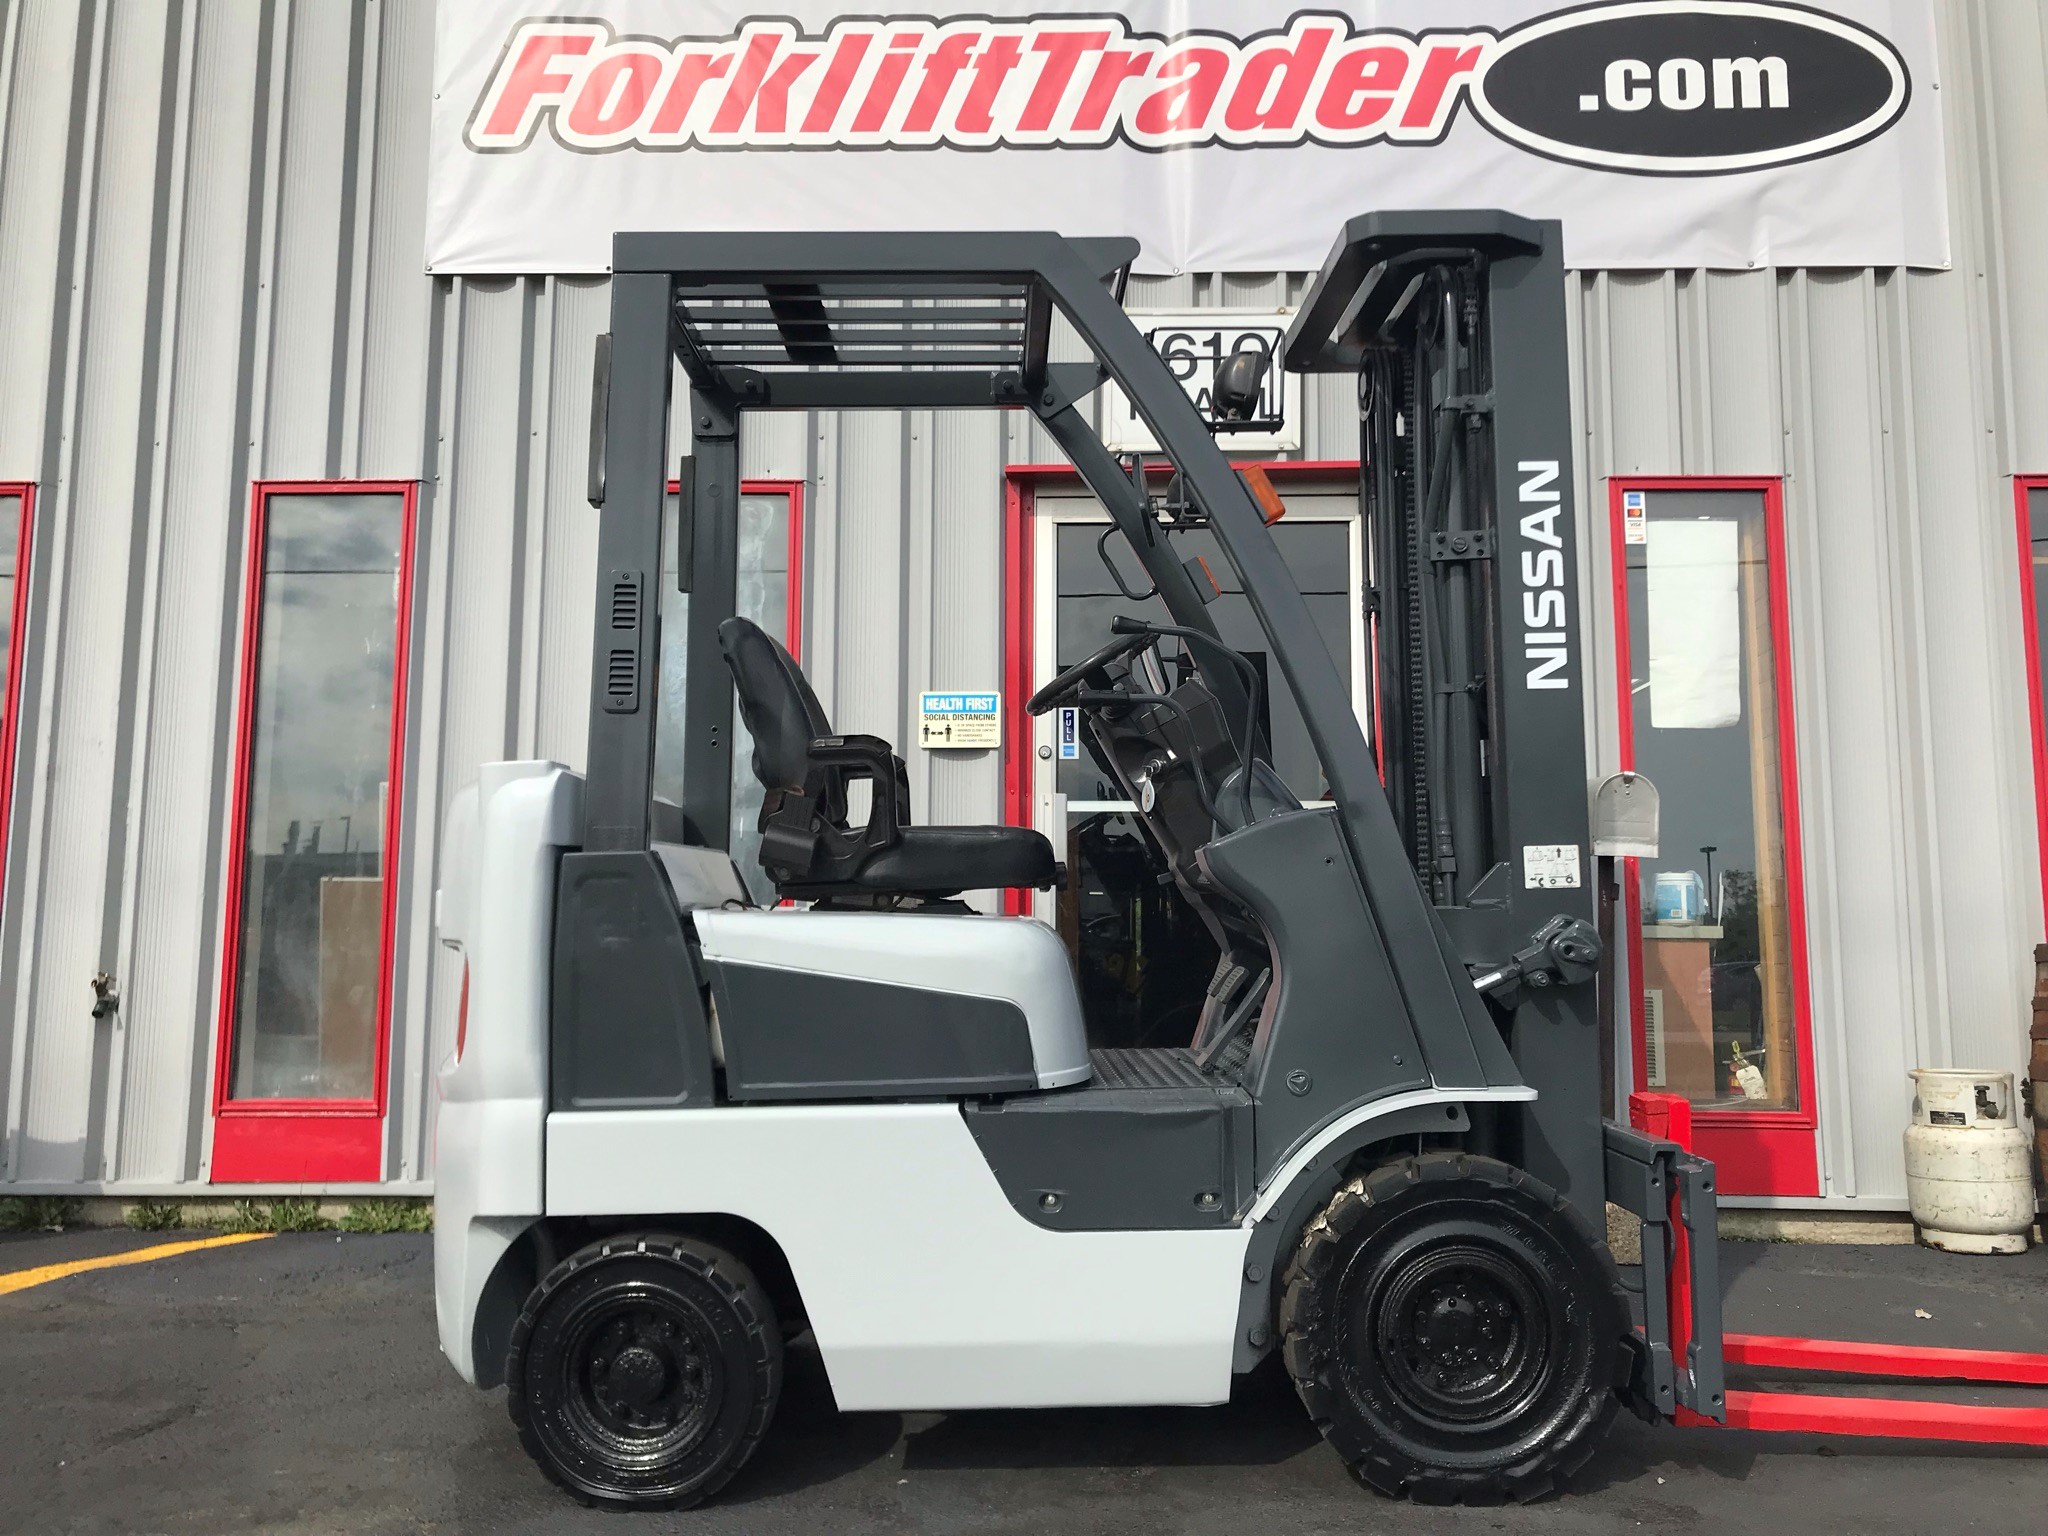 White 2005 nissan forklift with 3 stage mast for sale